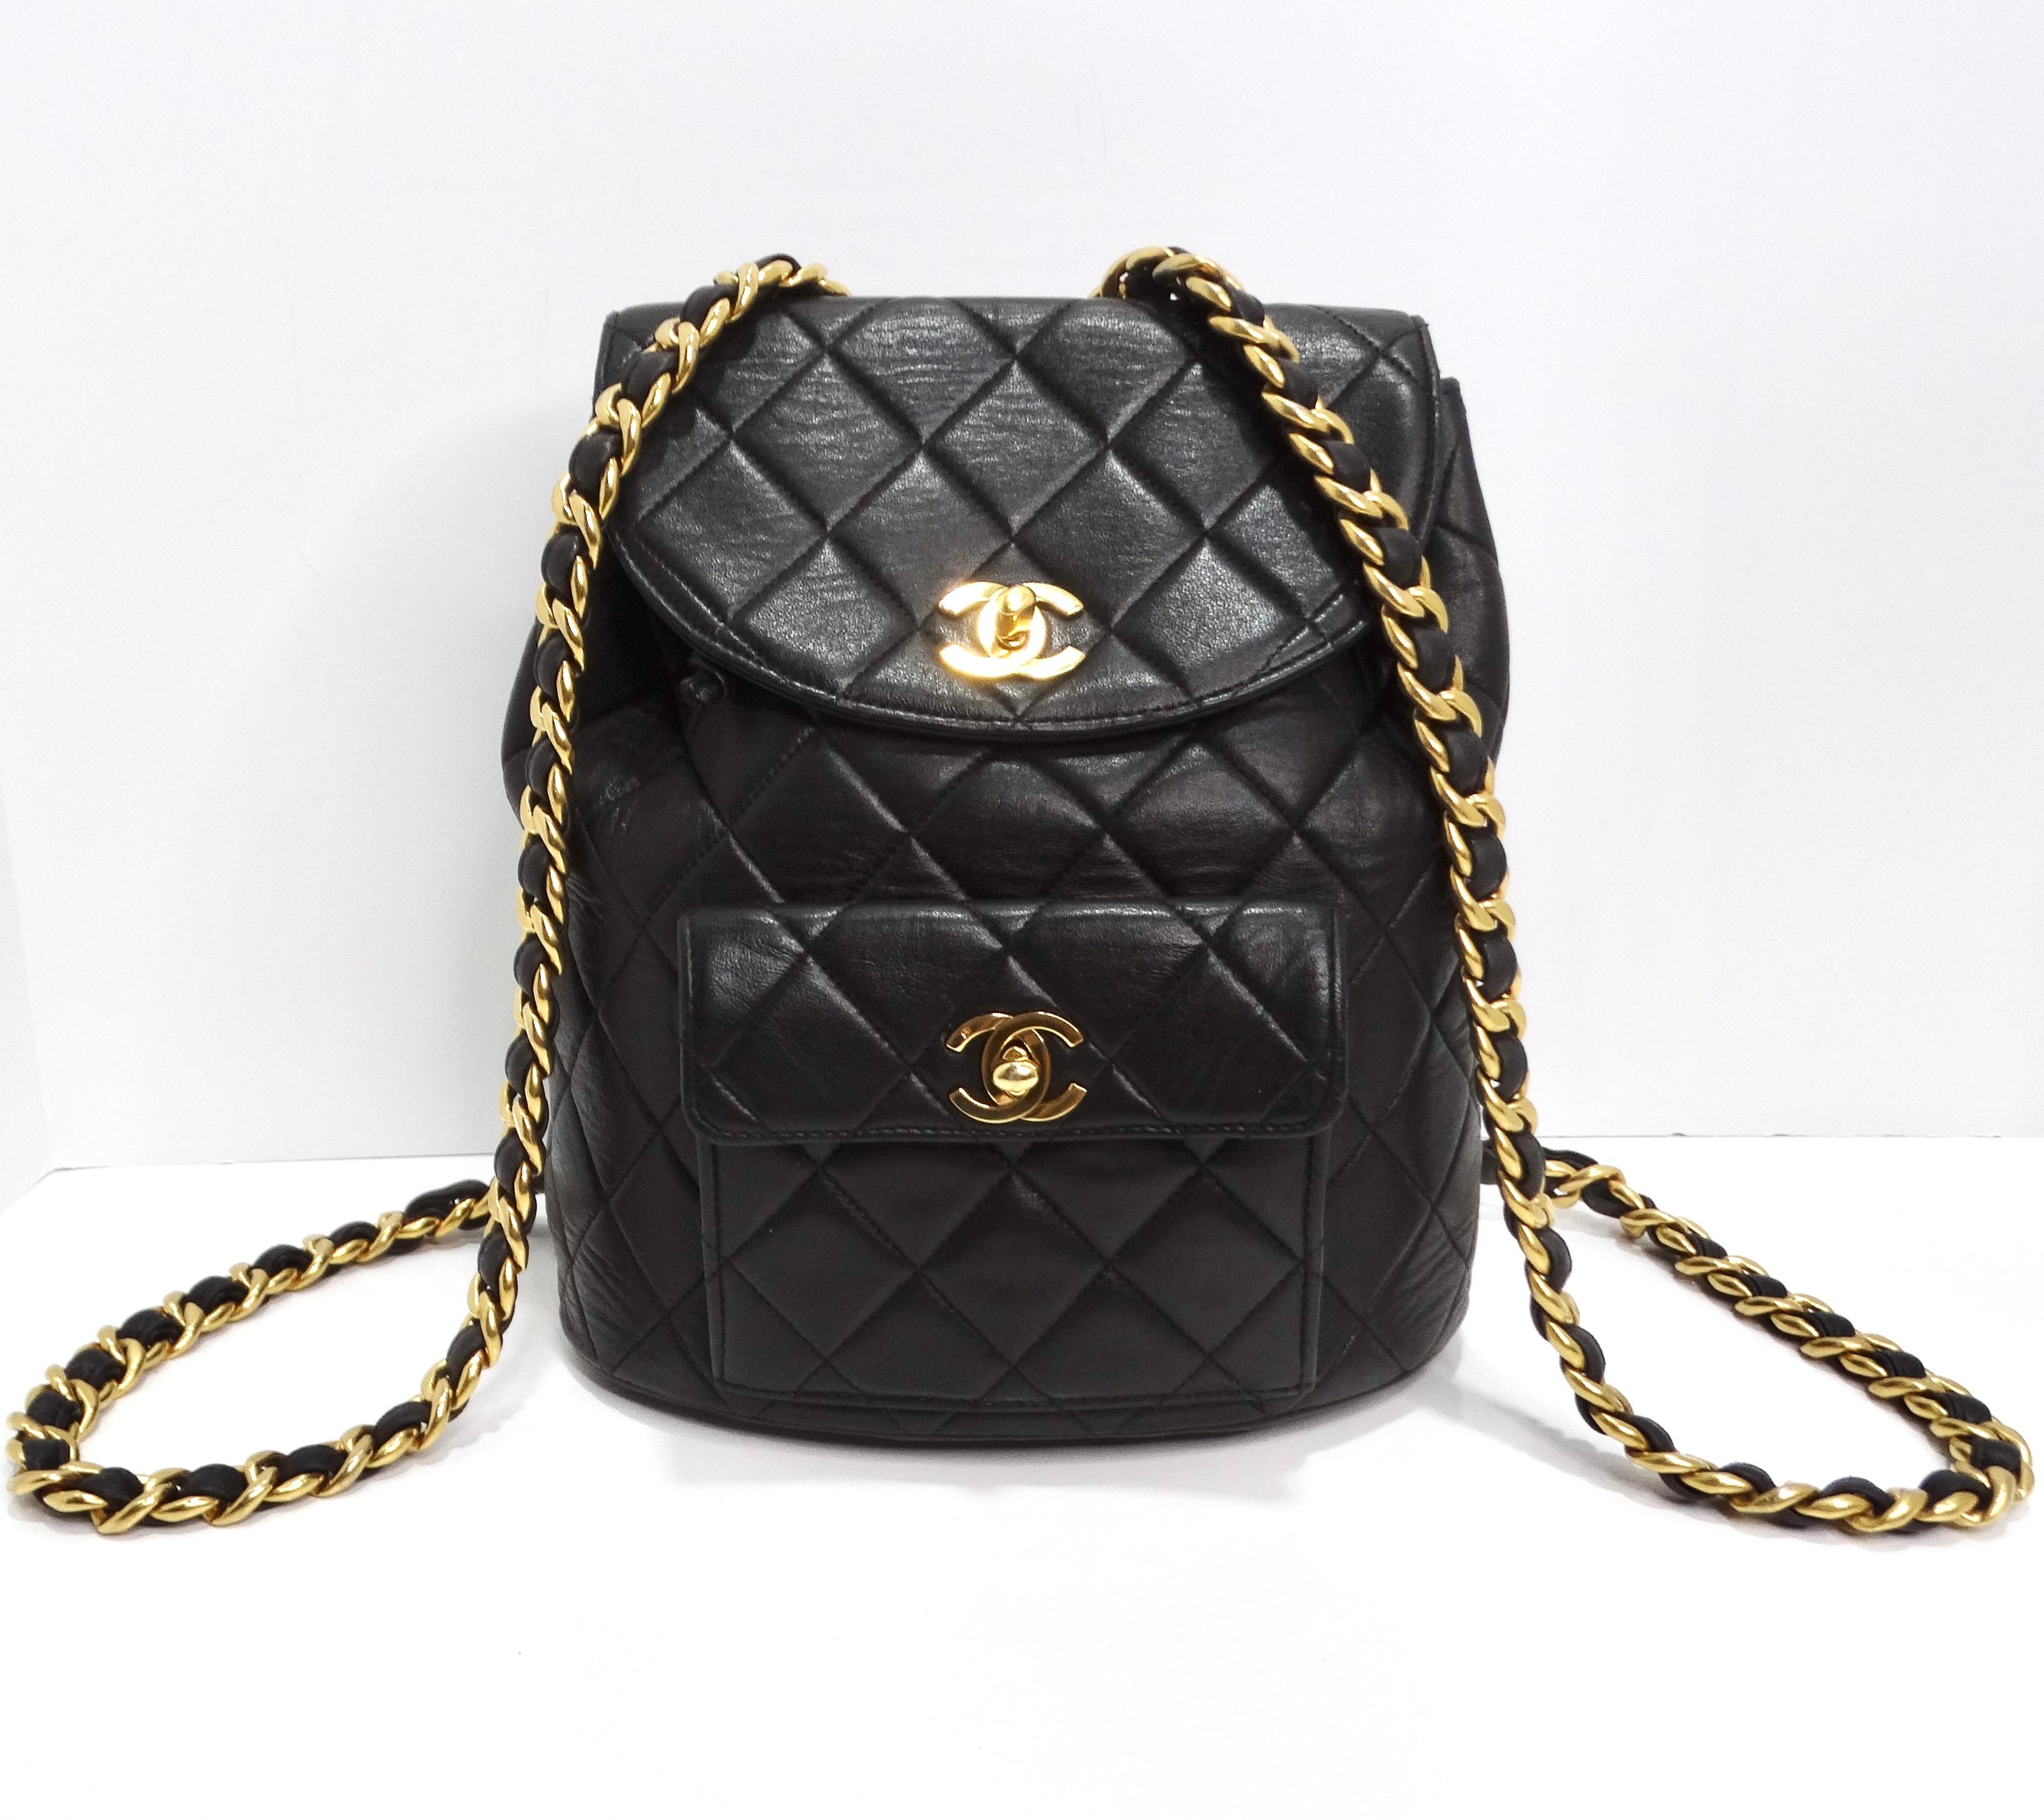 Introducing the iconic Chanel 1990s Lambskin Quilted Backpack, a timeless piece that exudes sophistication and luxury. Crafted from black lambskin leather, this mini backpack features Chanel's signature quilting, adding texture and elegance to the